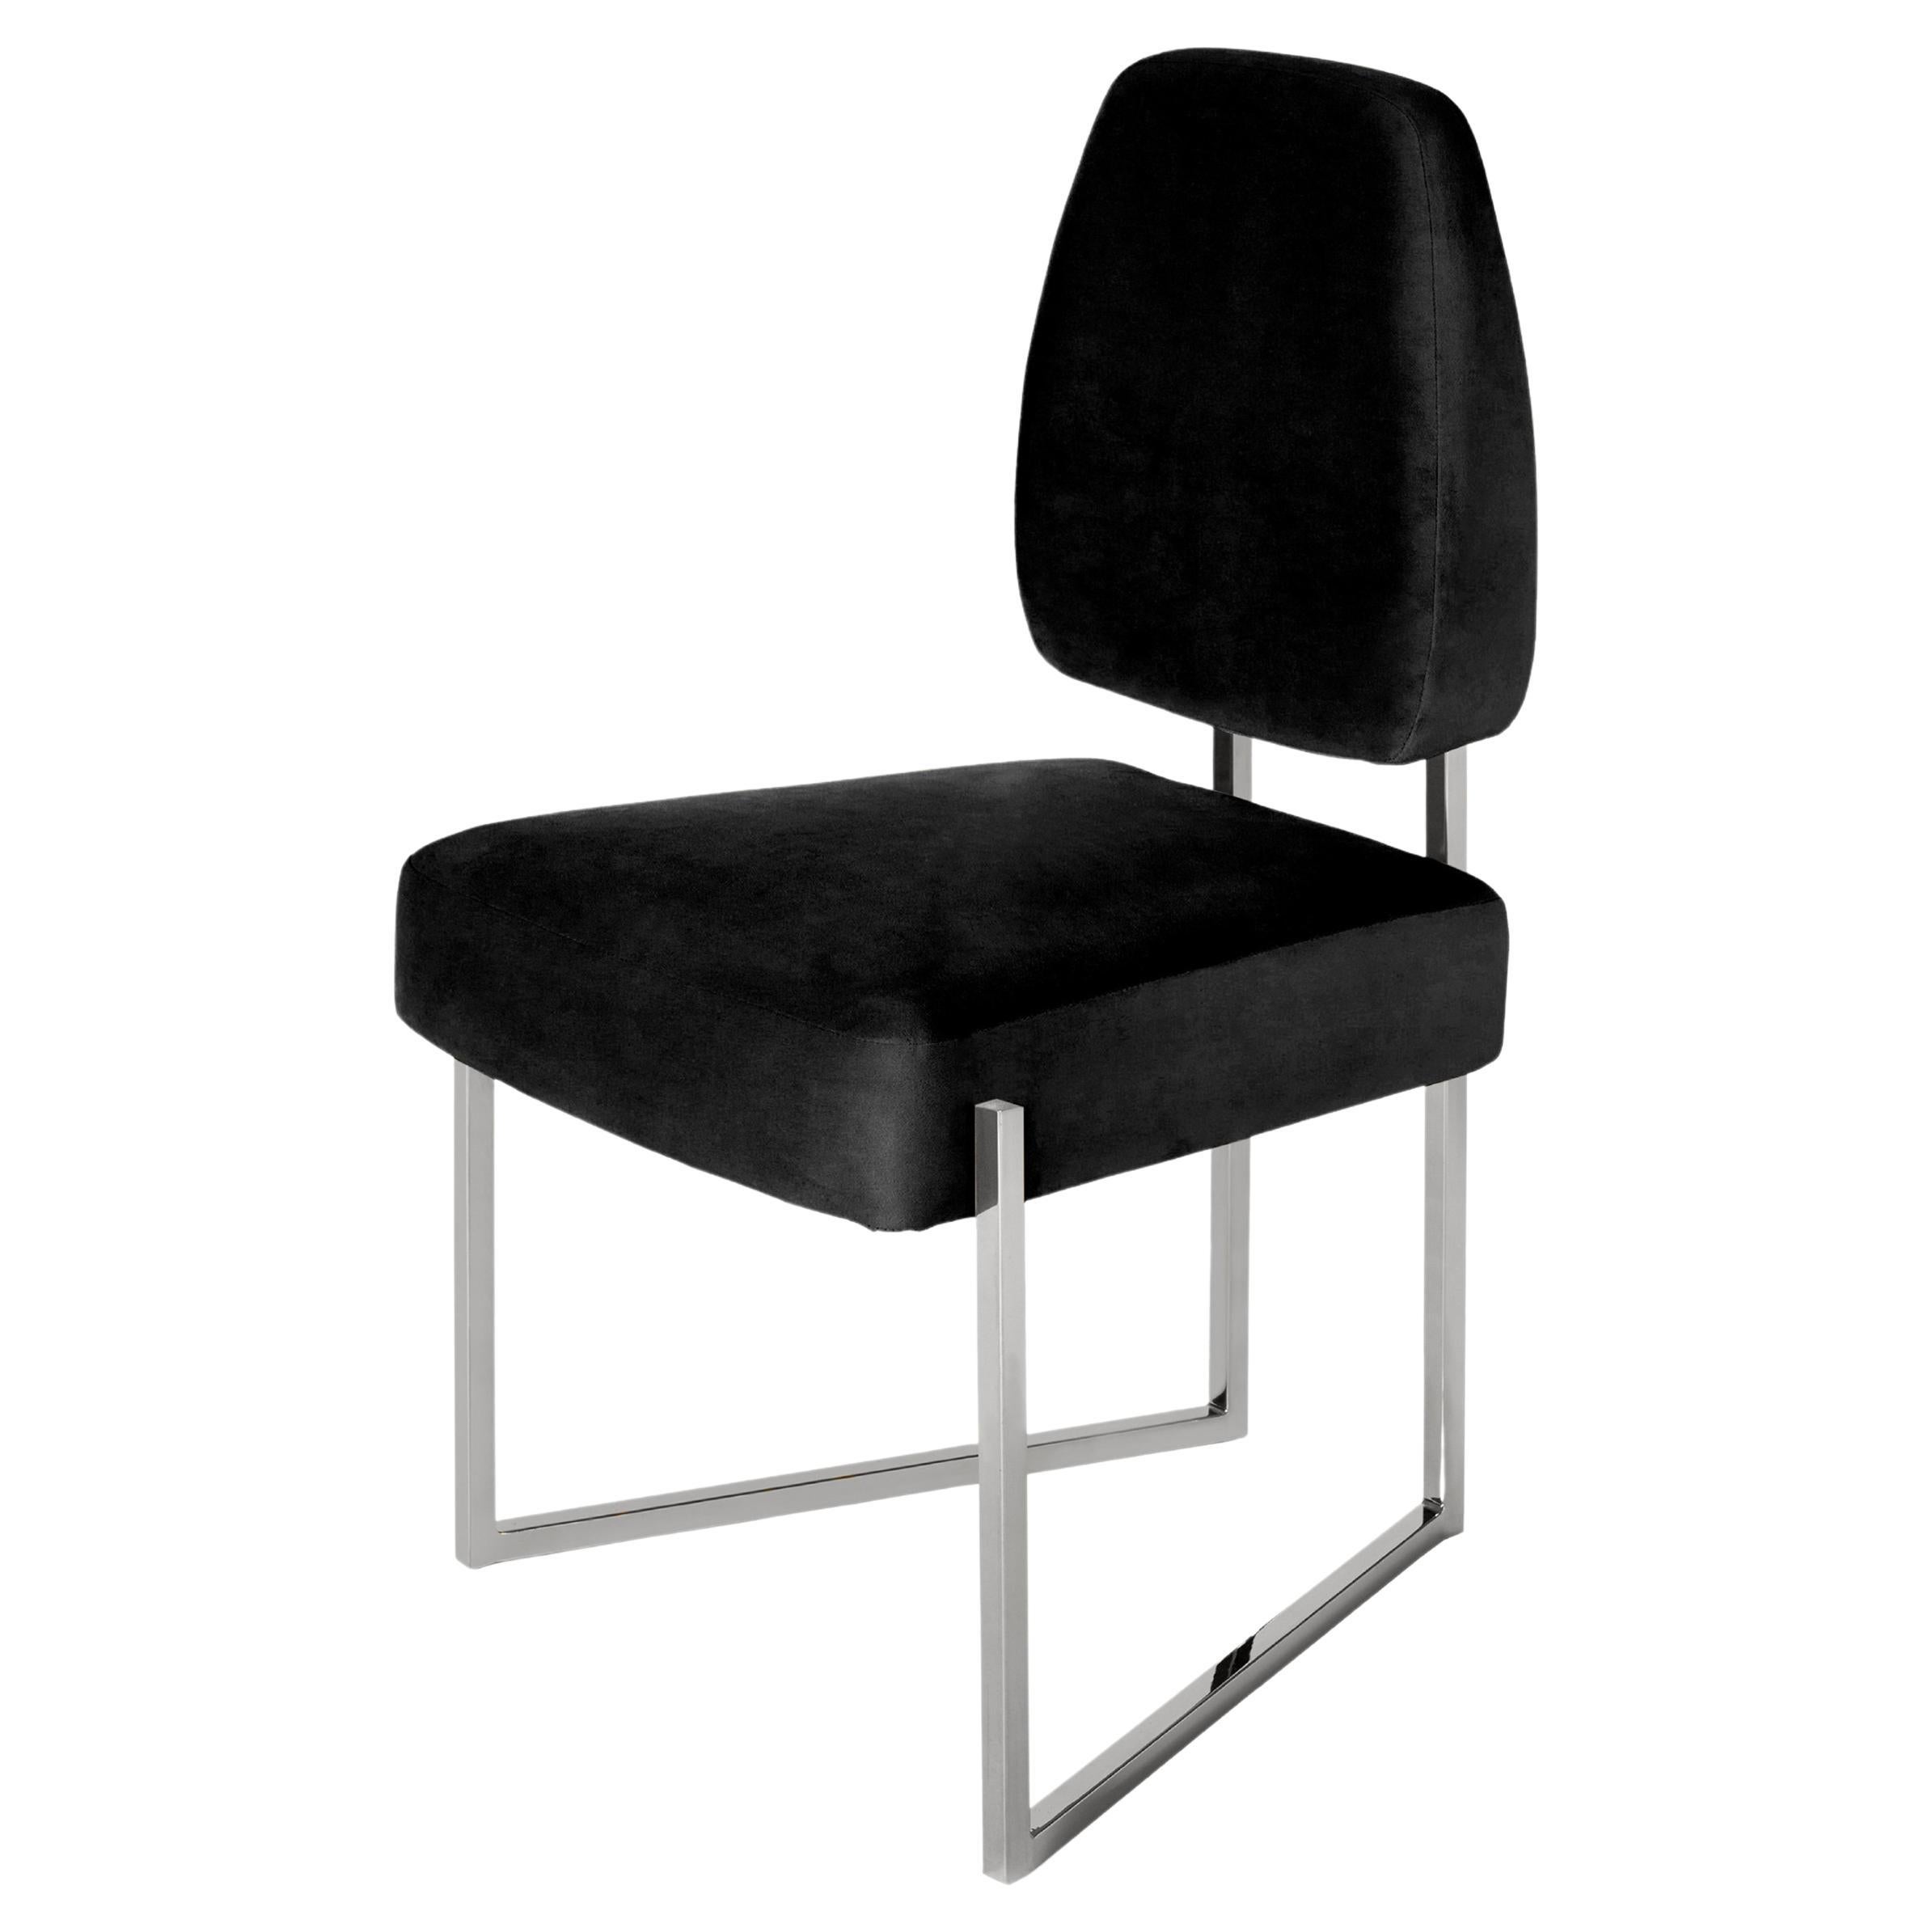 Perspective II Dining Chair, Steel, InsidherLand by Joana Santos Barbosa For Sale